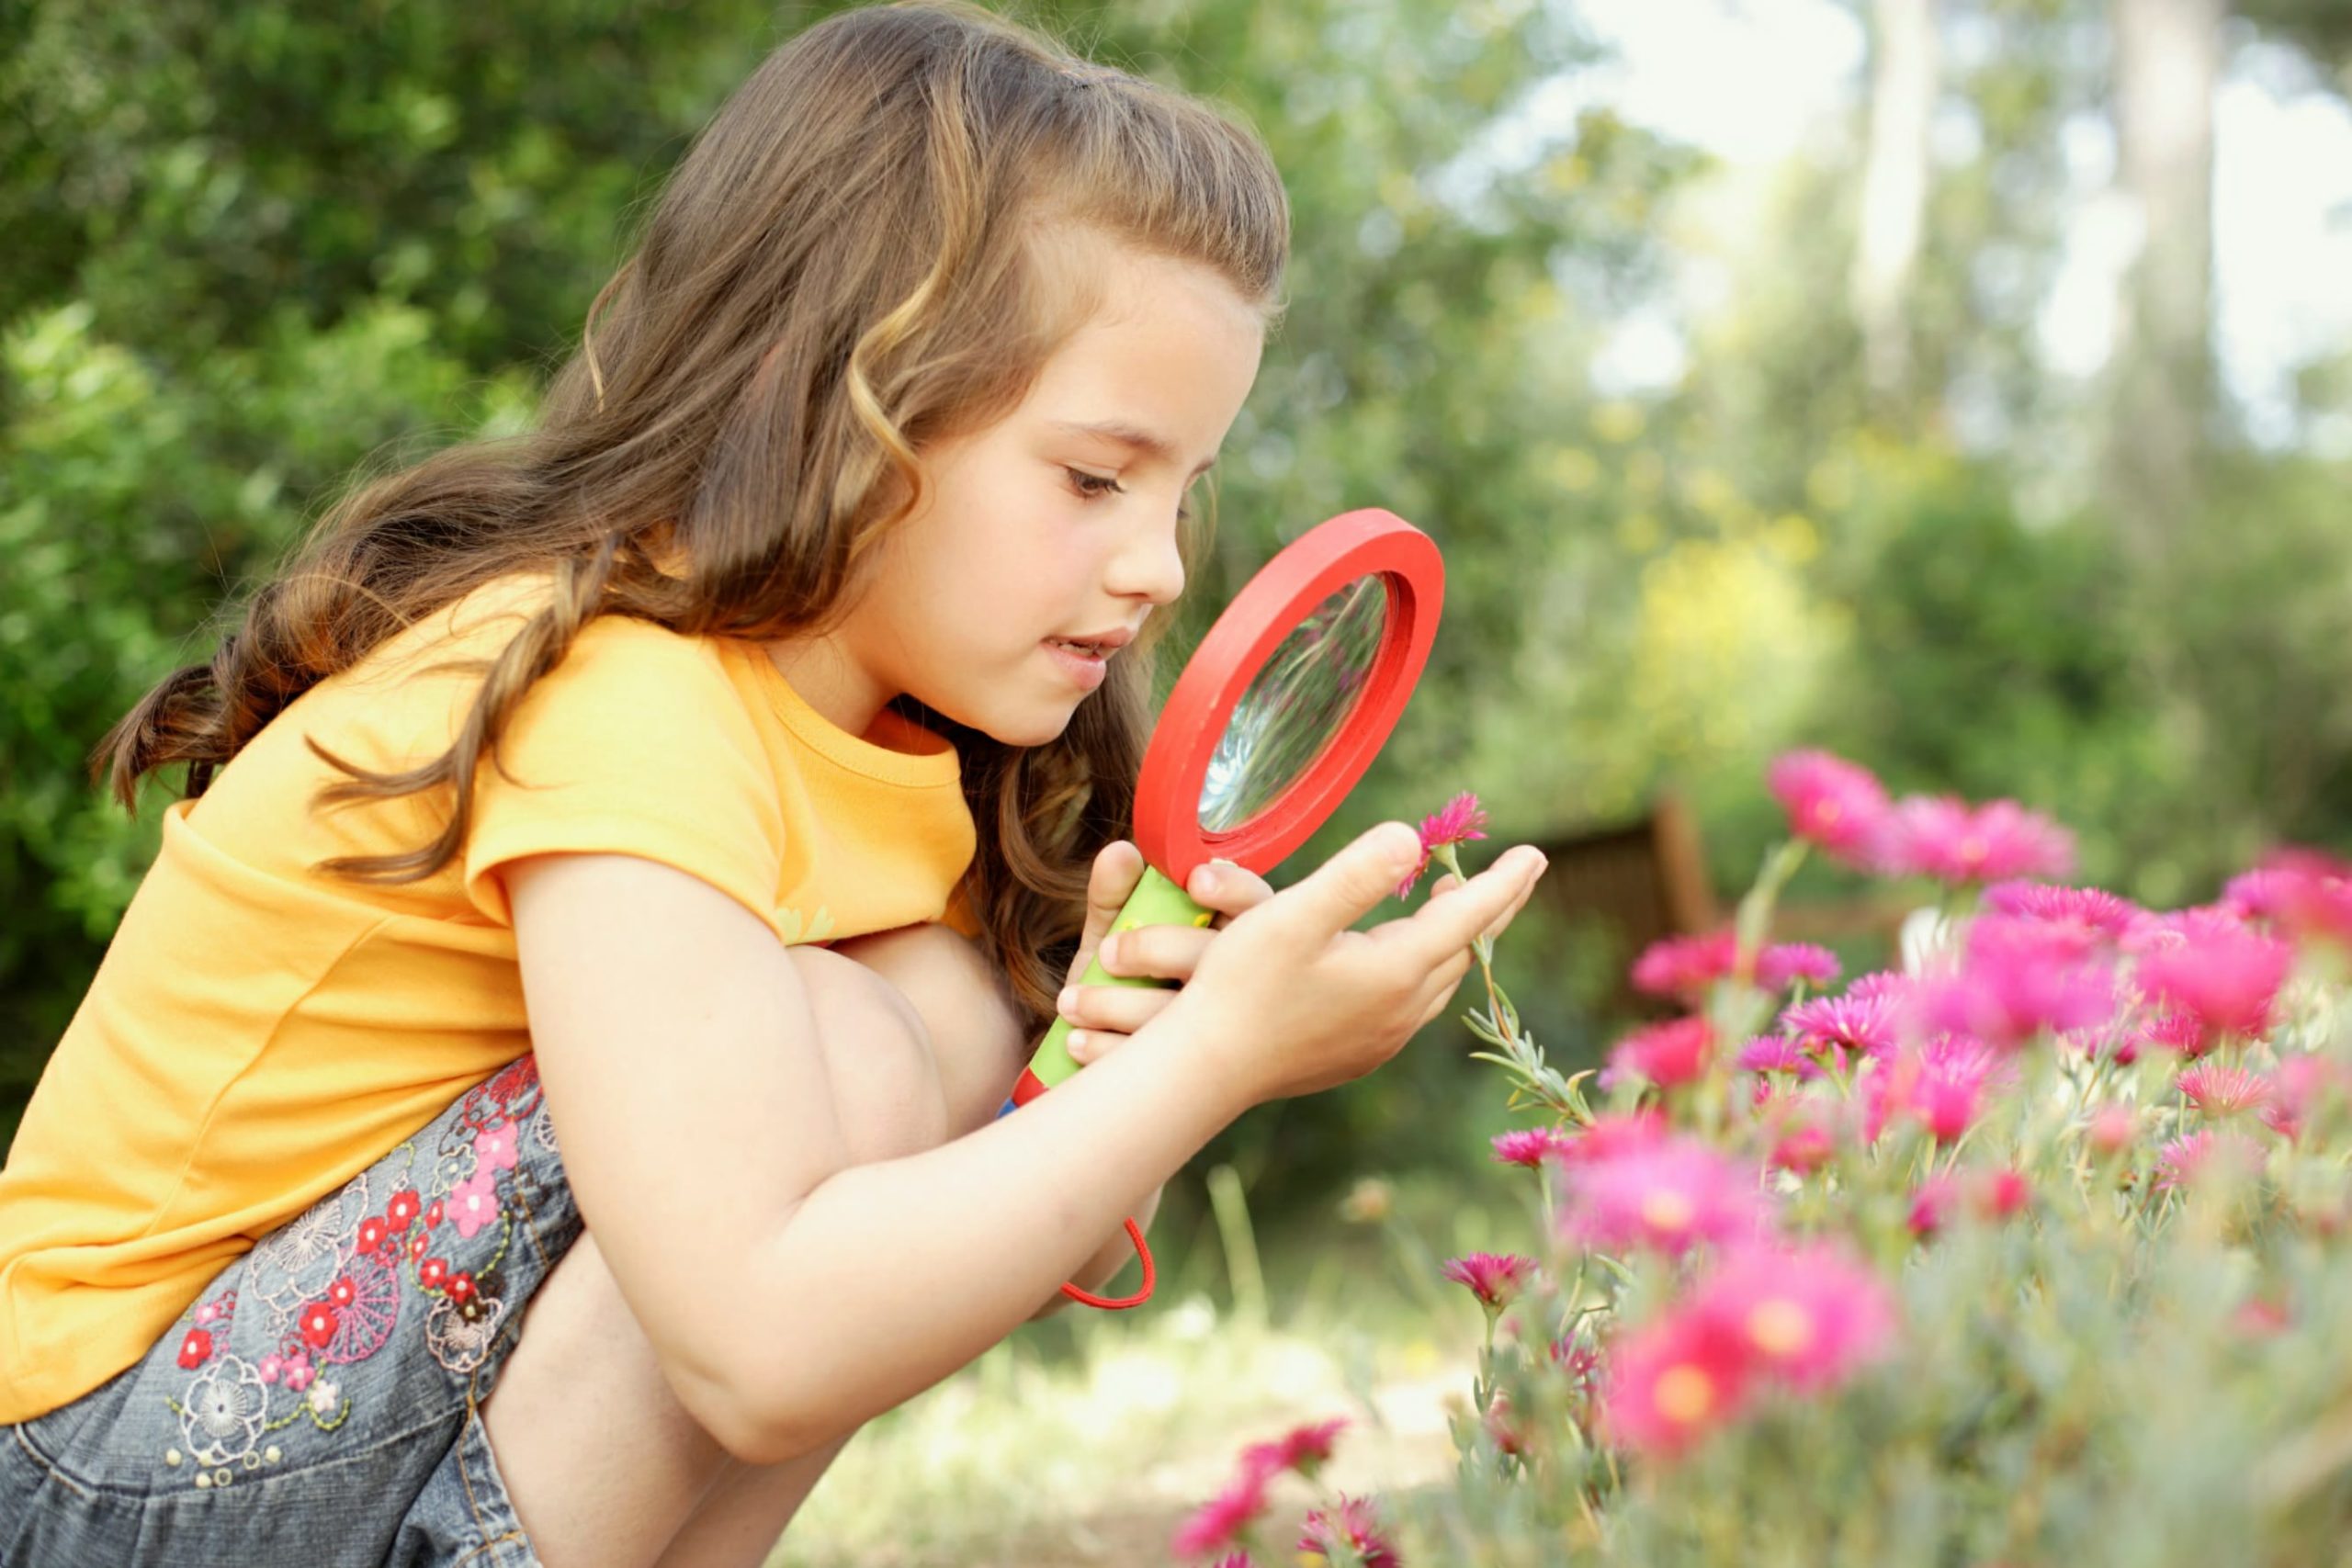 Girl looking at flowers through a magnifying glass